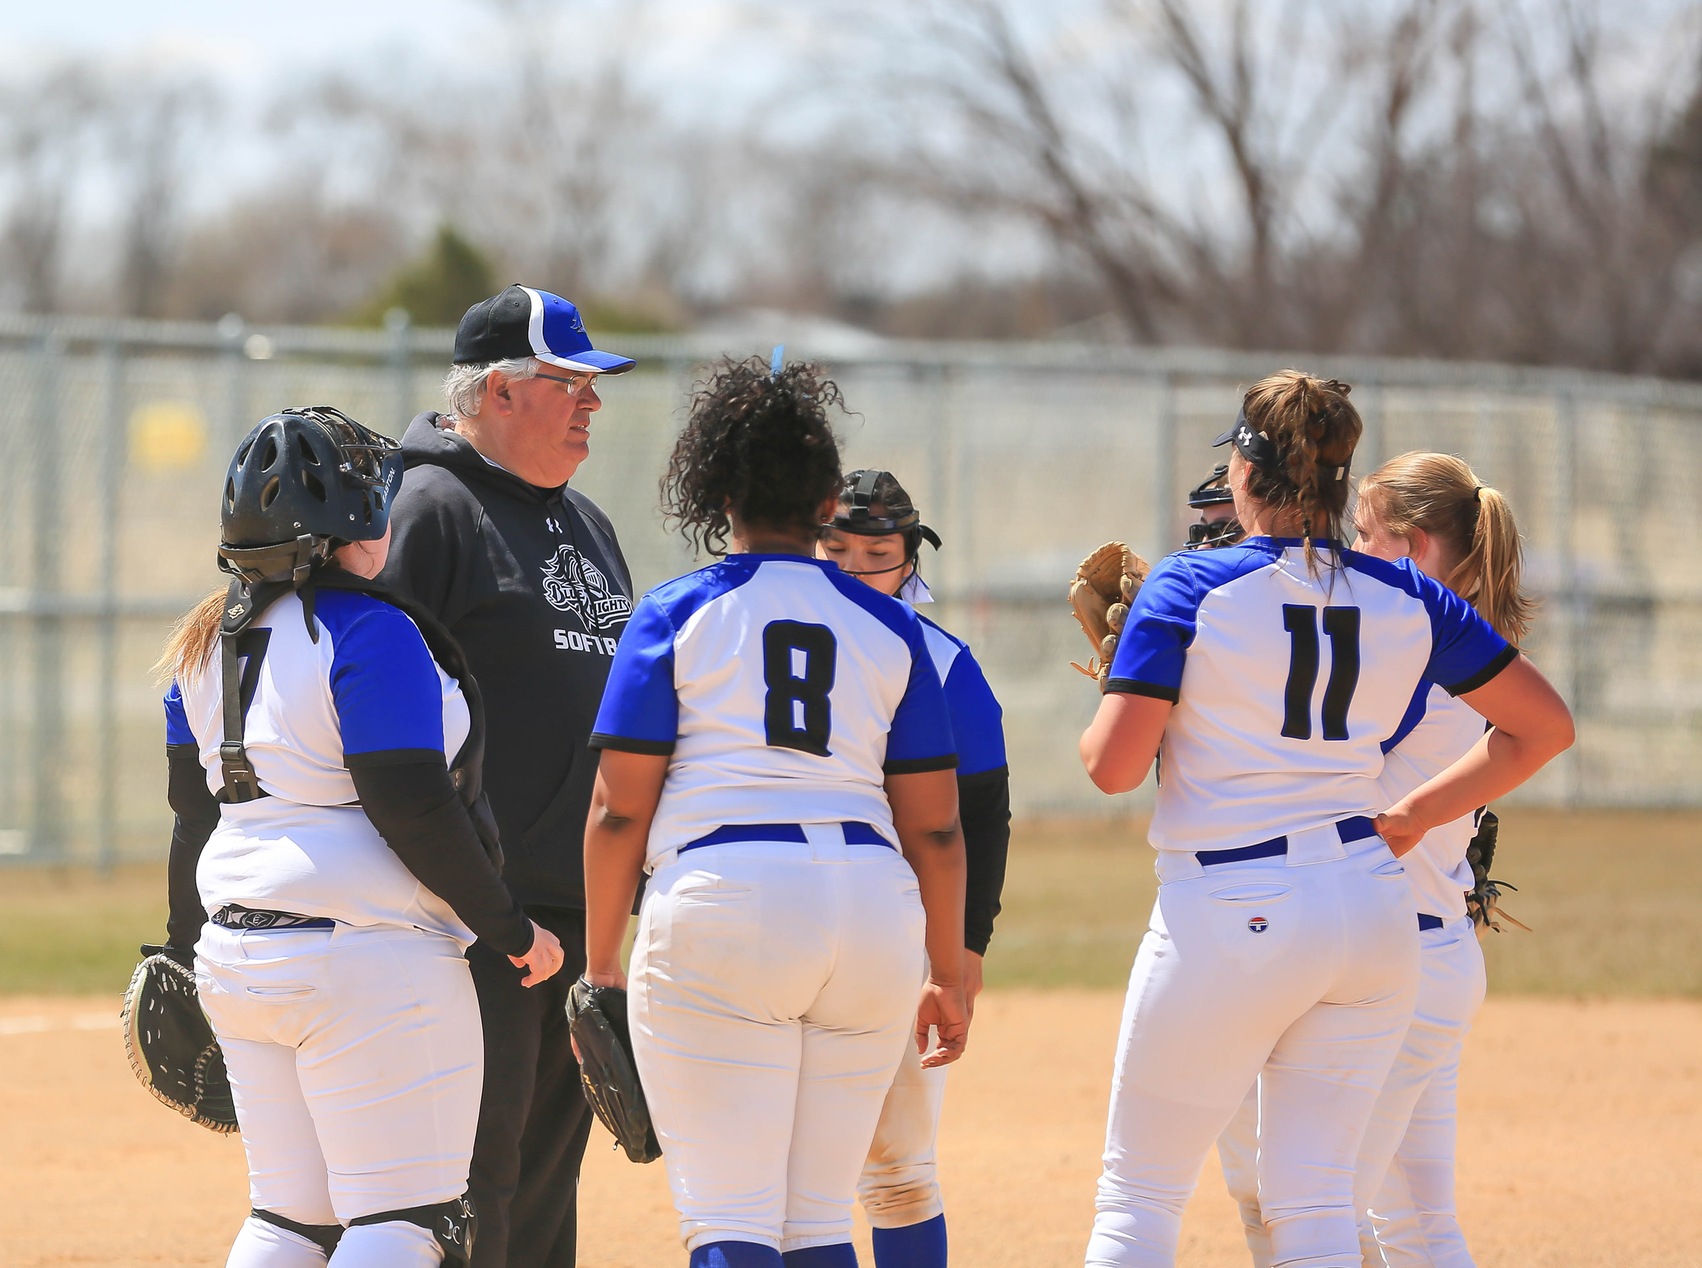 Due to field conditions and weather, the Softball Dugout Opening has been postponed to April 30 at 4 p.m. against St. Thomas University. Bethel Games moved to Bethel